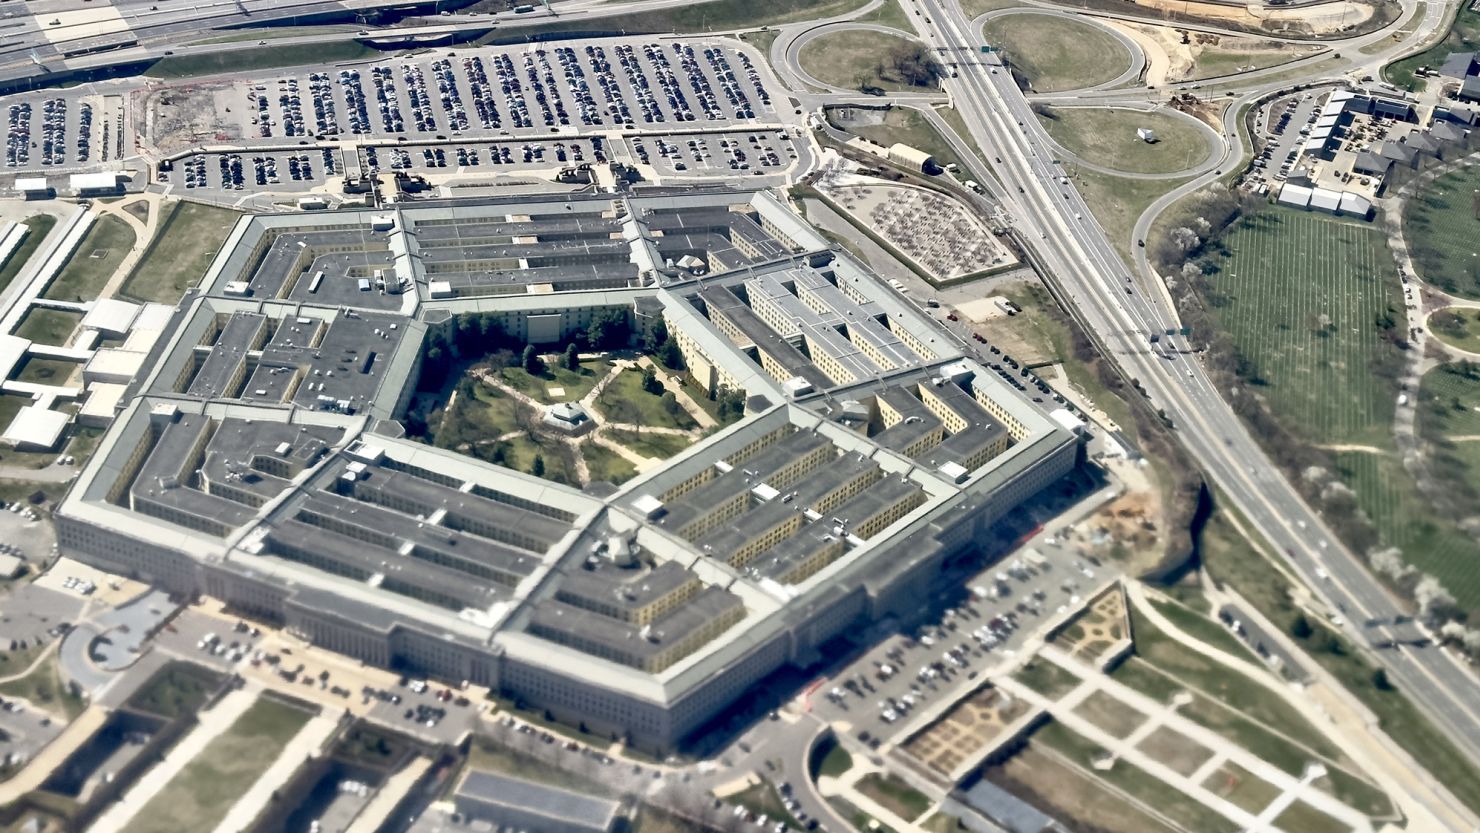 This aerial photograph taken on March 8, 2023, shows the Pentagon, the headquarters of the US Department of Defense.